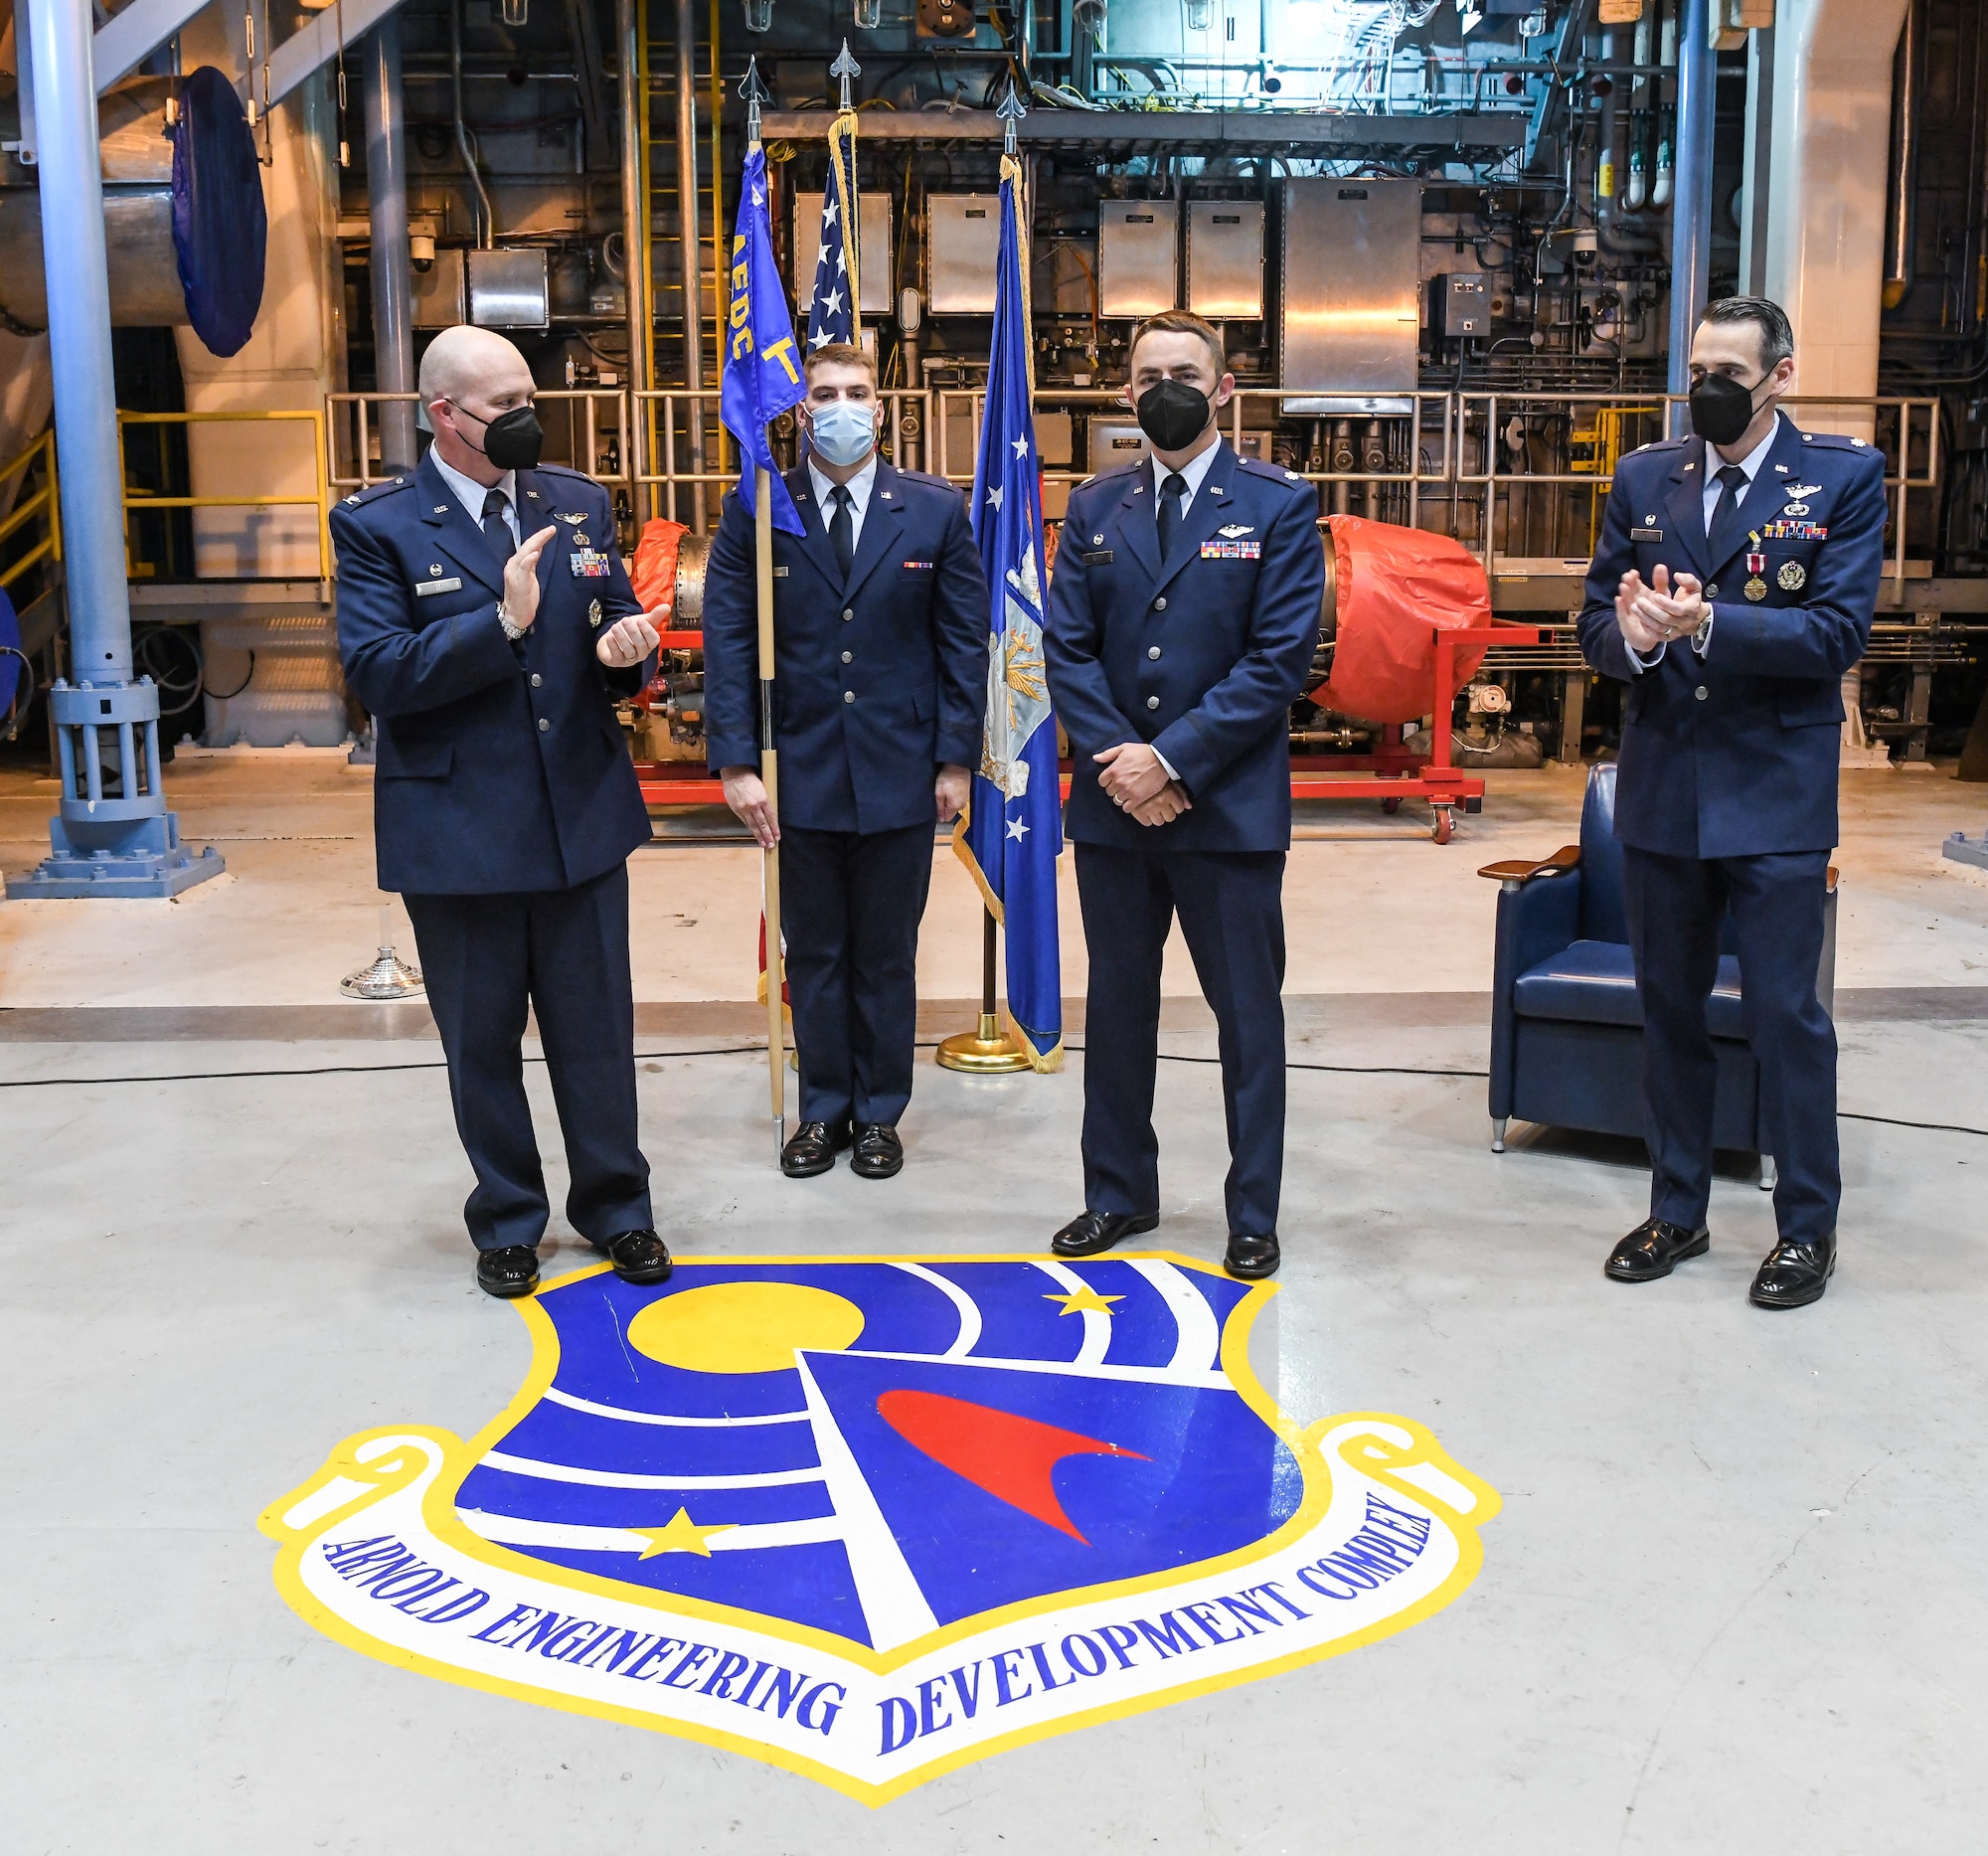 Col. Jason Vap, left, commander, 804th Test Group, and Lt. Col. Lane Haubelt, right, previous commander of 717th Test Squadron, applaud Lt. Col. Ryne Roady, center, after he assumed command of the 717 TS during a change of command ceremony July 8, 2022,